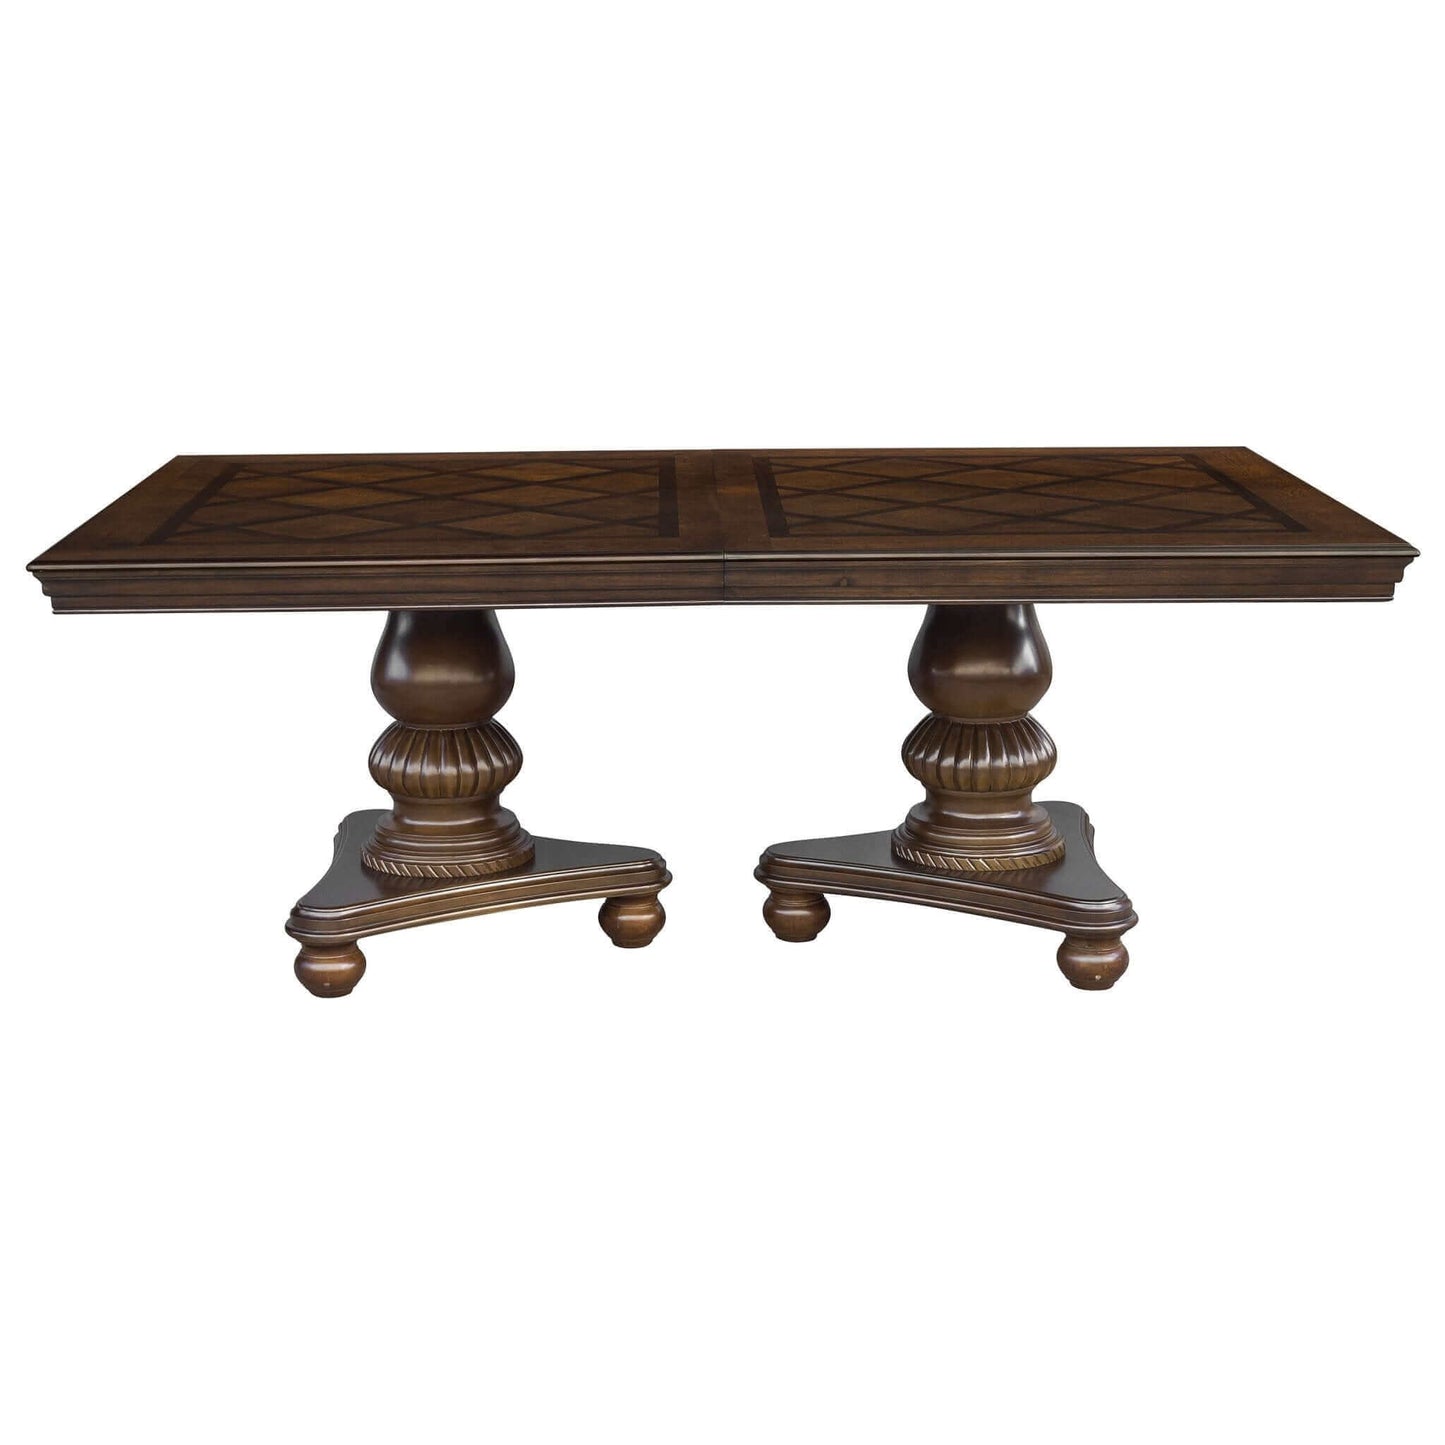 Brown cherry finish traditional style dining table with ornate double pedestal base.